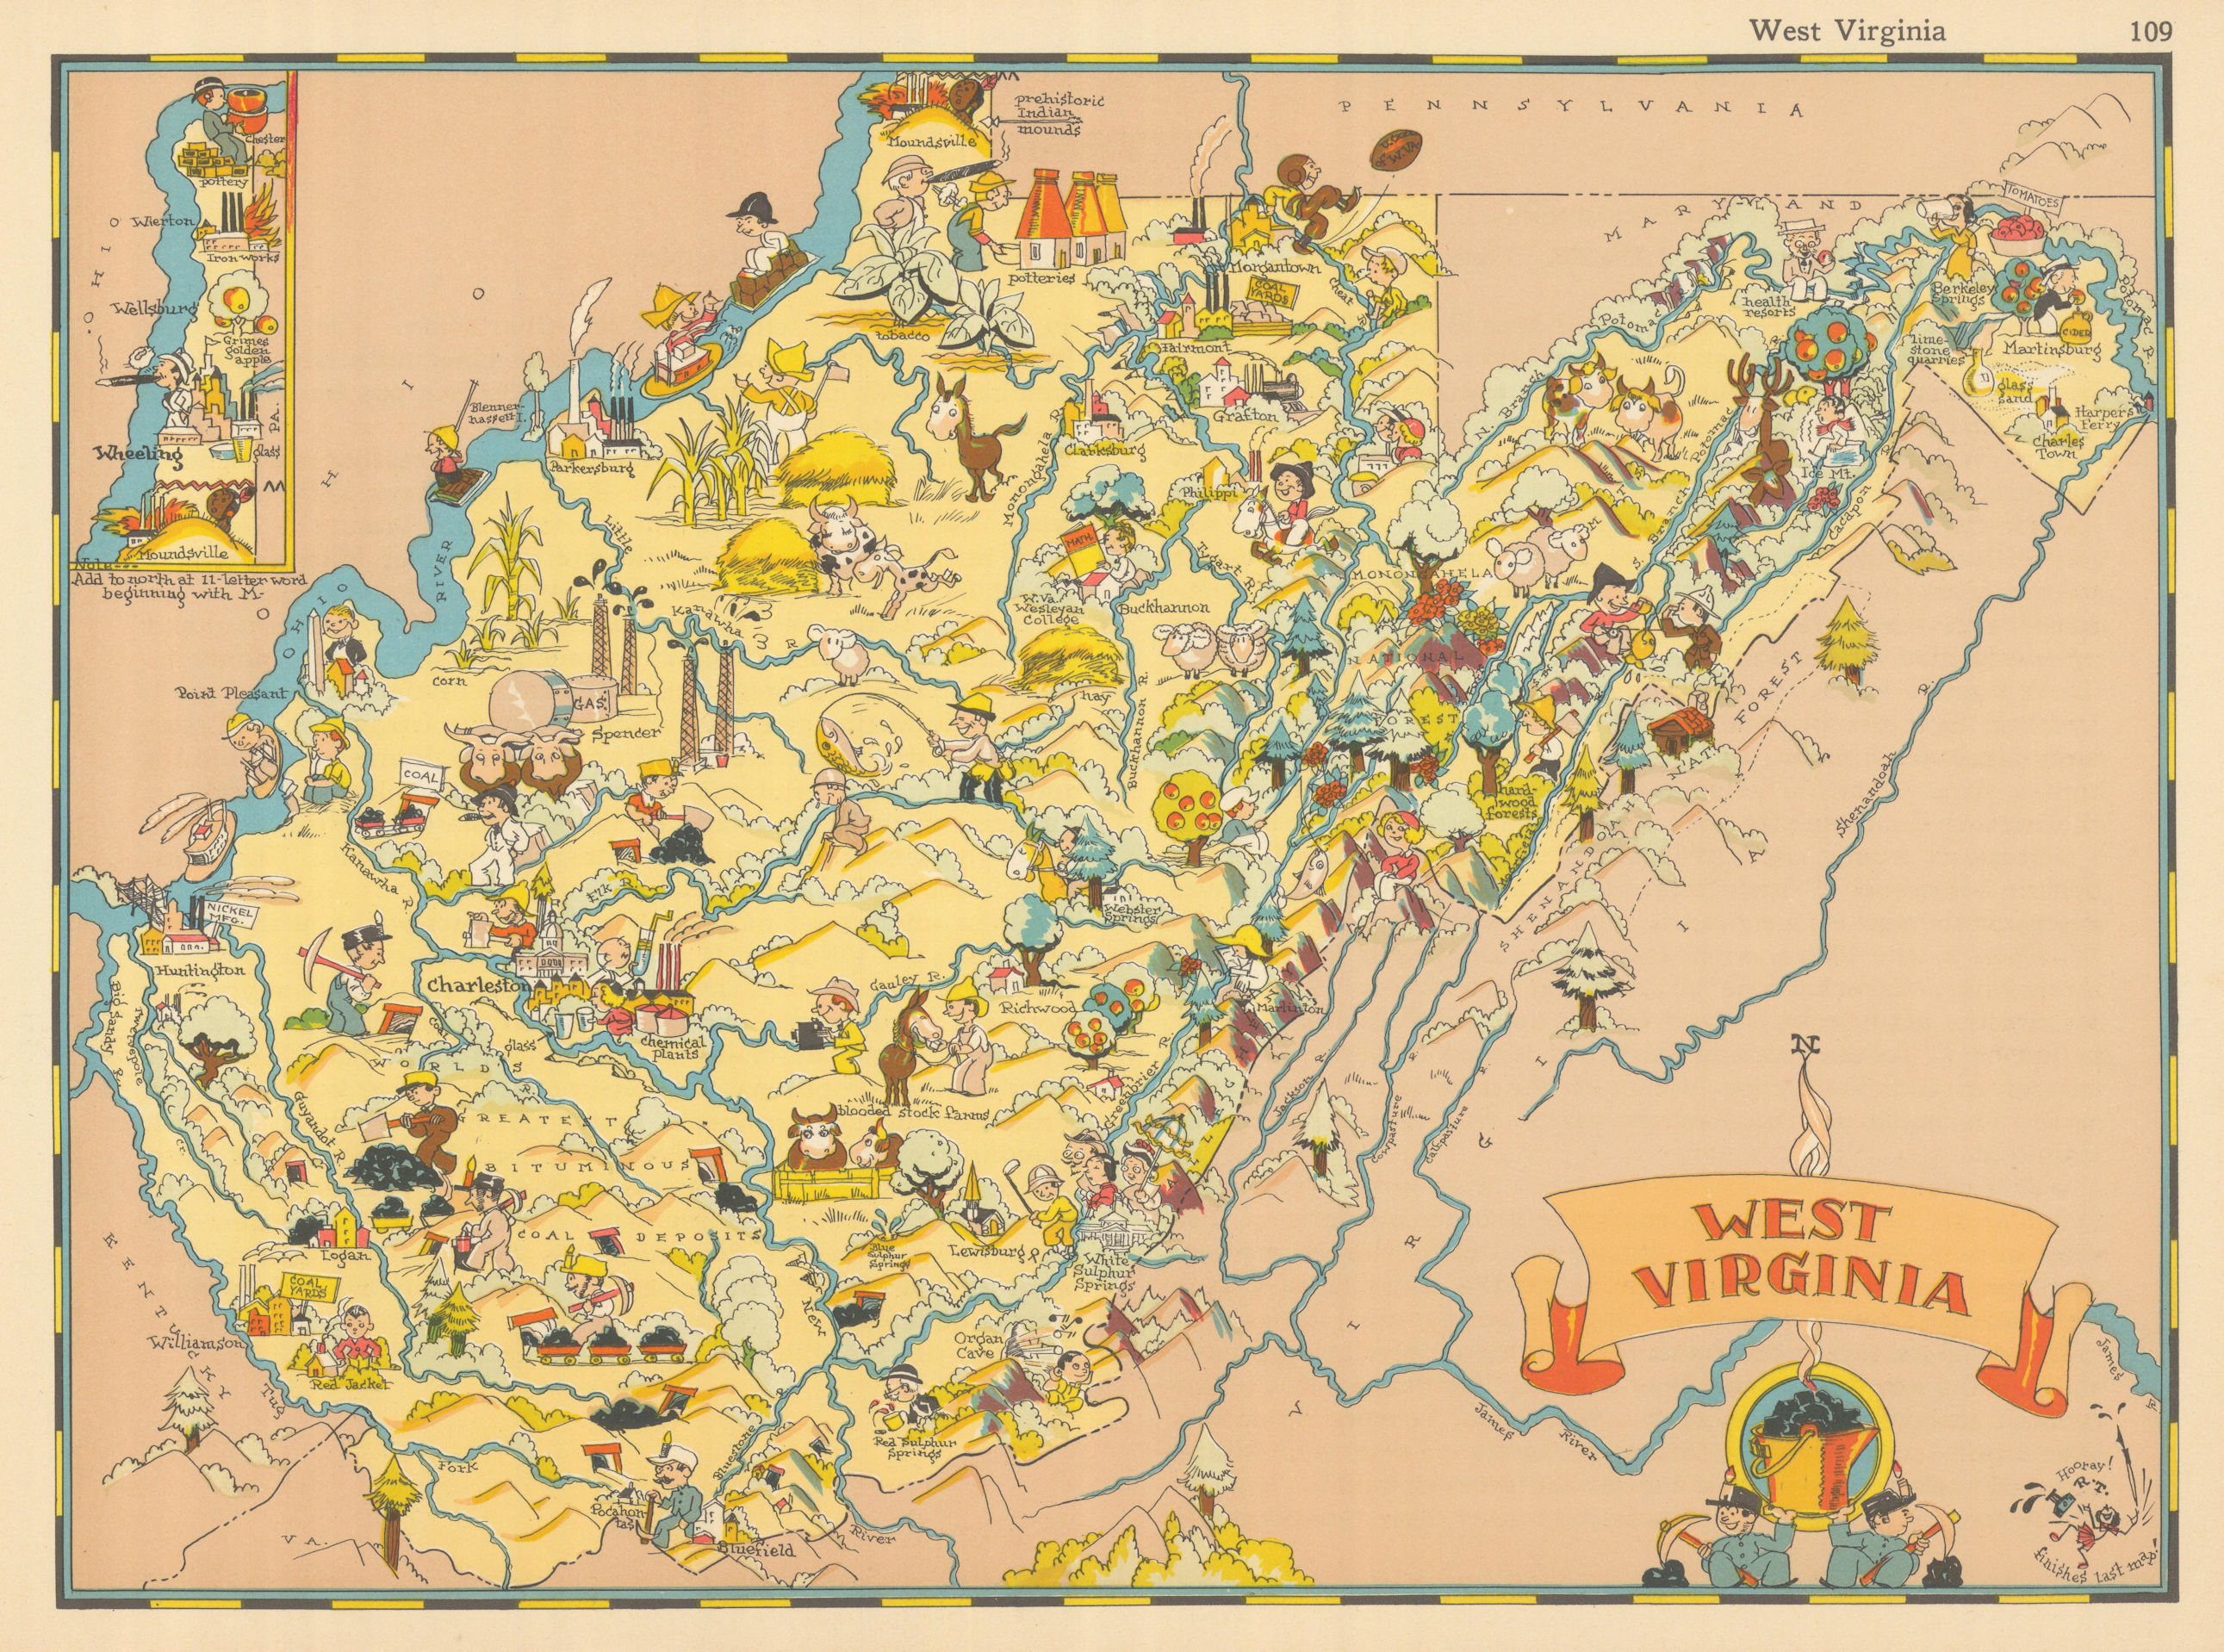 Associate Product West Virginia. Pictorial state map by Ruth Taylor White 1935 old vintage